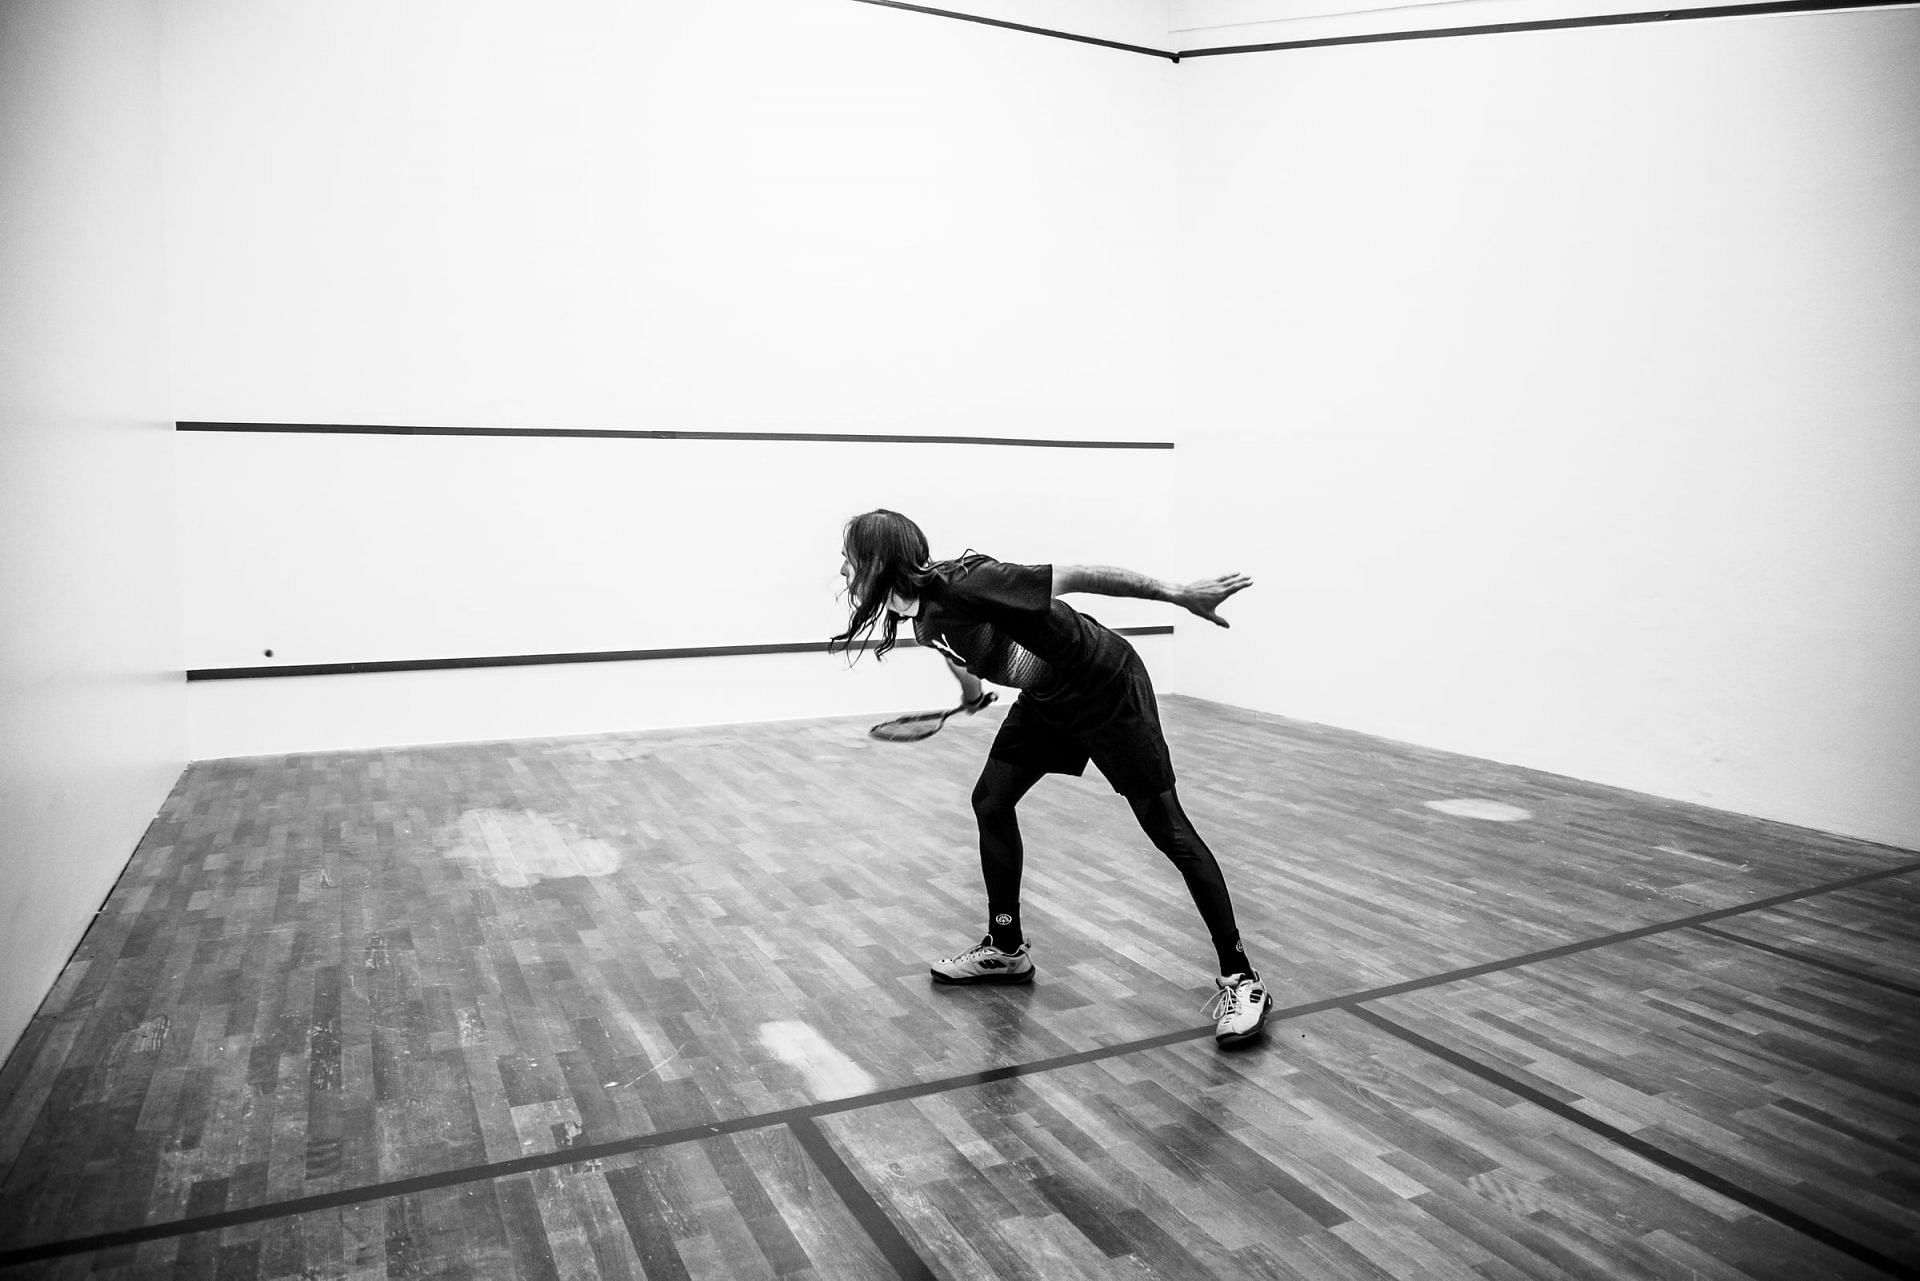 Squash is an all body workout, but not good for hypertension patients. (Photo by Sven Mieke on Unsplash)